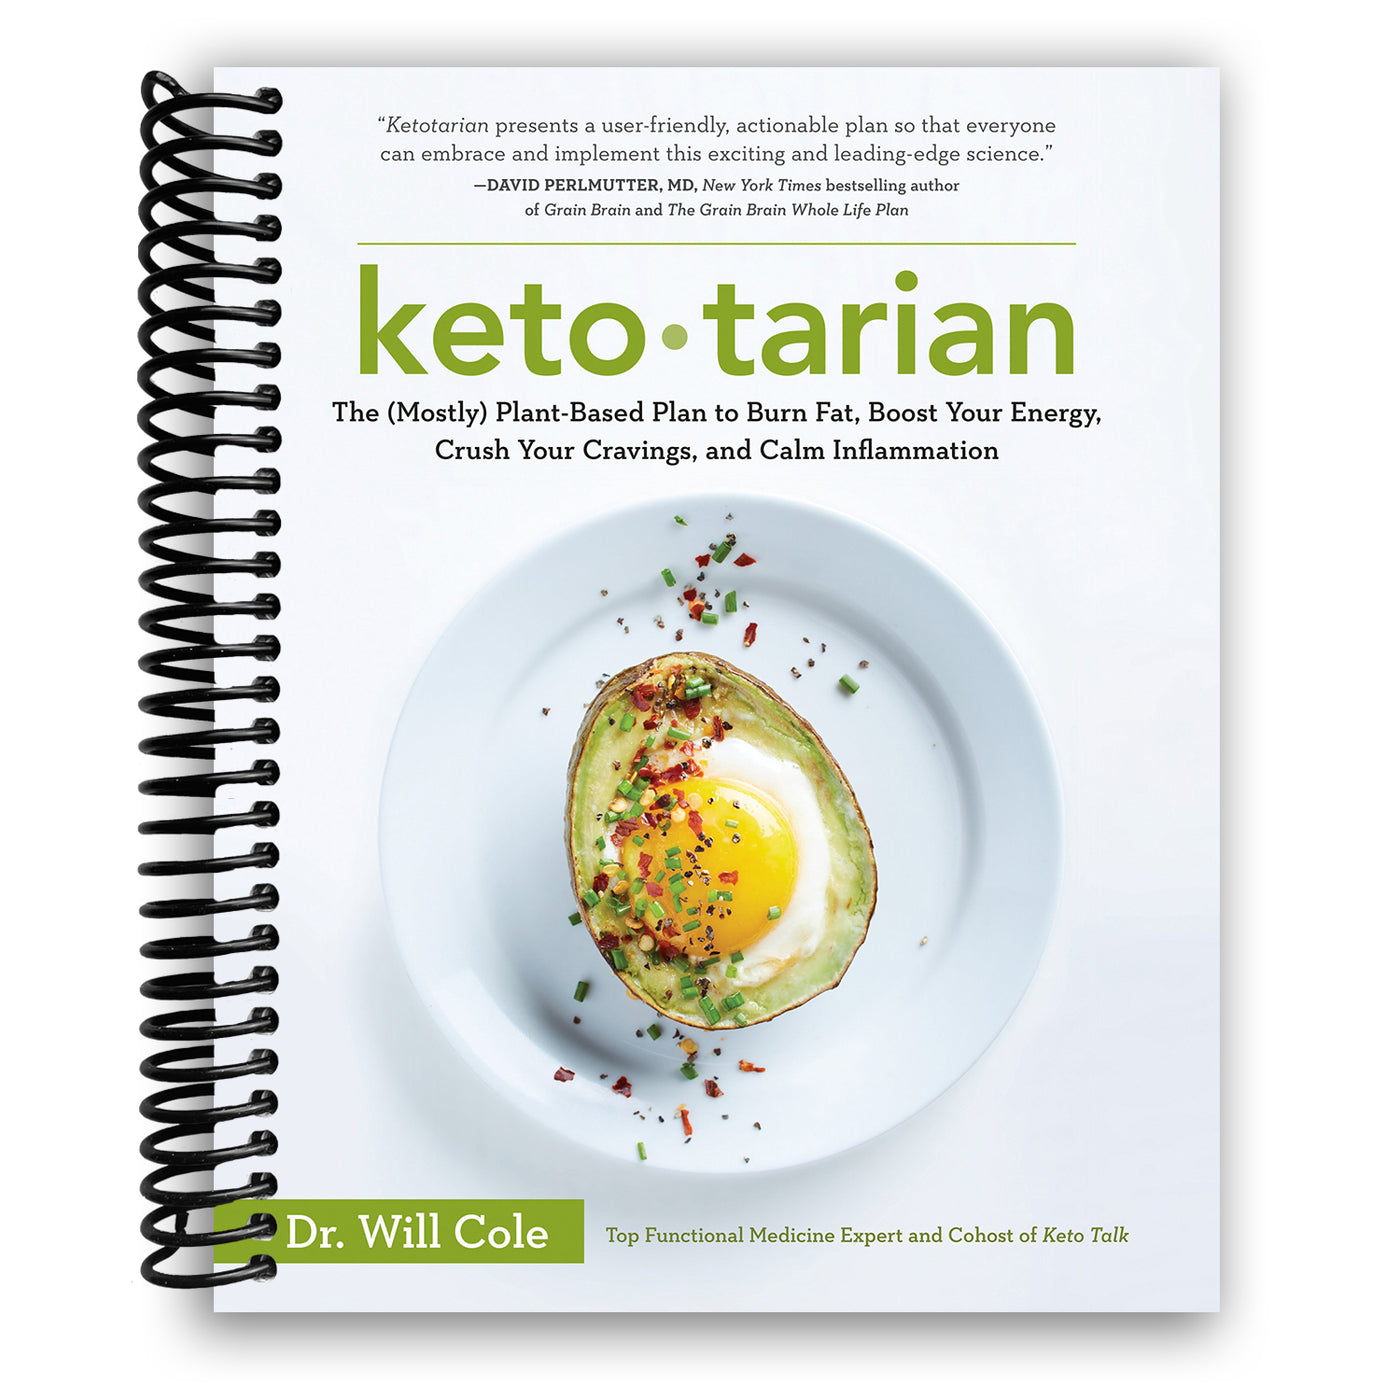 Ketotarian: The (Mostly) Plant-Based Plan to Burn Fat, Boost Your Energy, Crush Your Cravings, and Calm Inflammation (Spiral Bound)